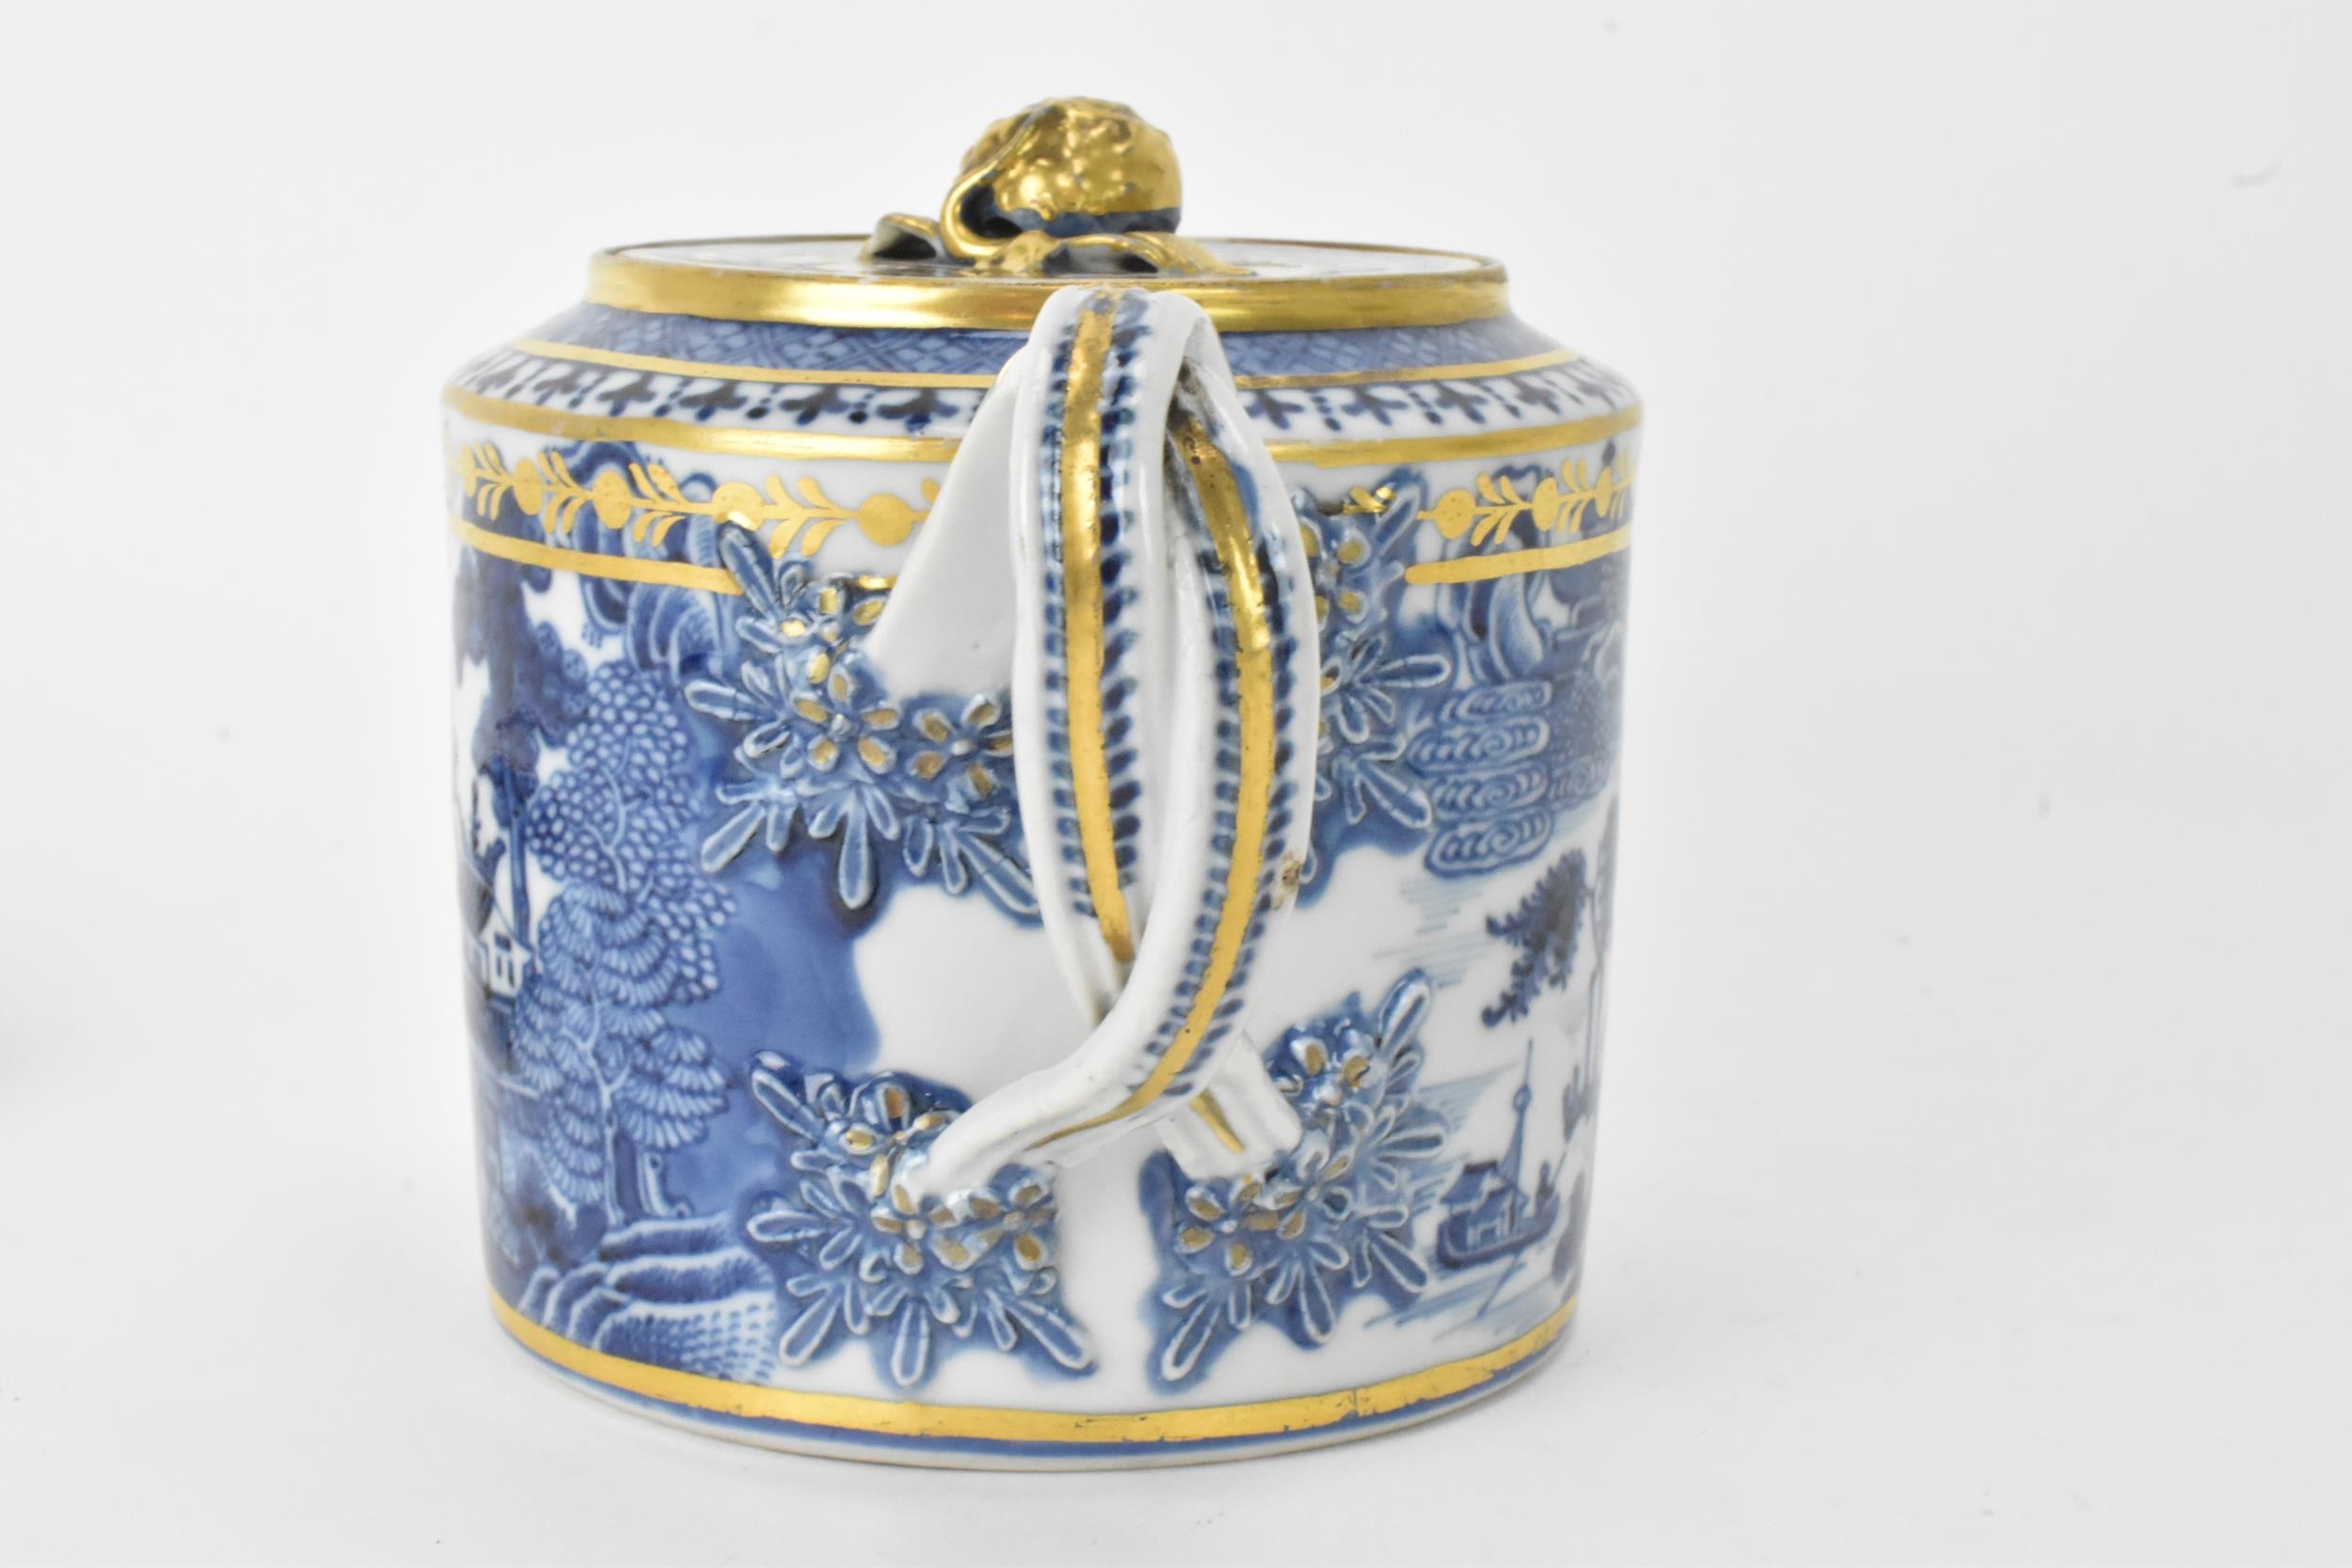 A Chinese export Qing dynasty blue and white teapot and stand, late 18th century, decorated with - Image 2 of 11